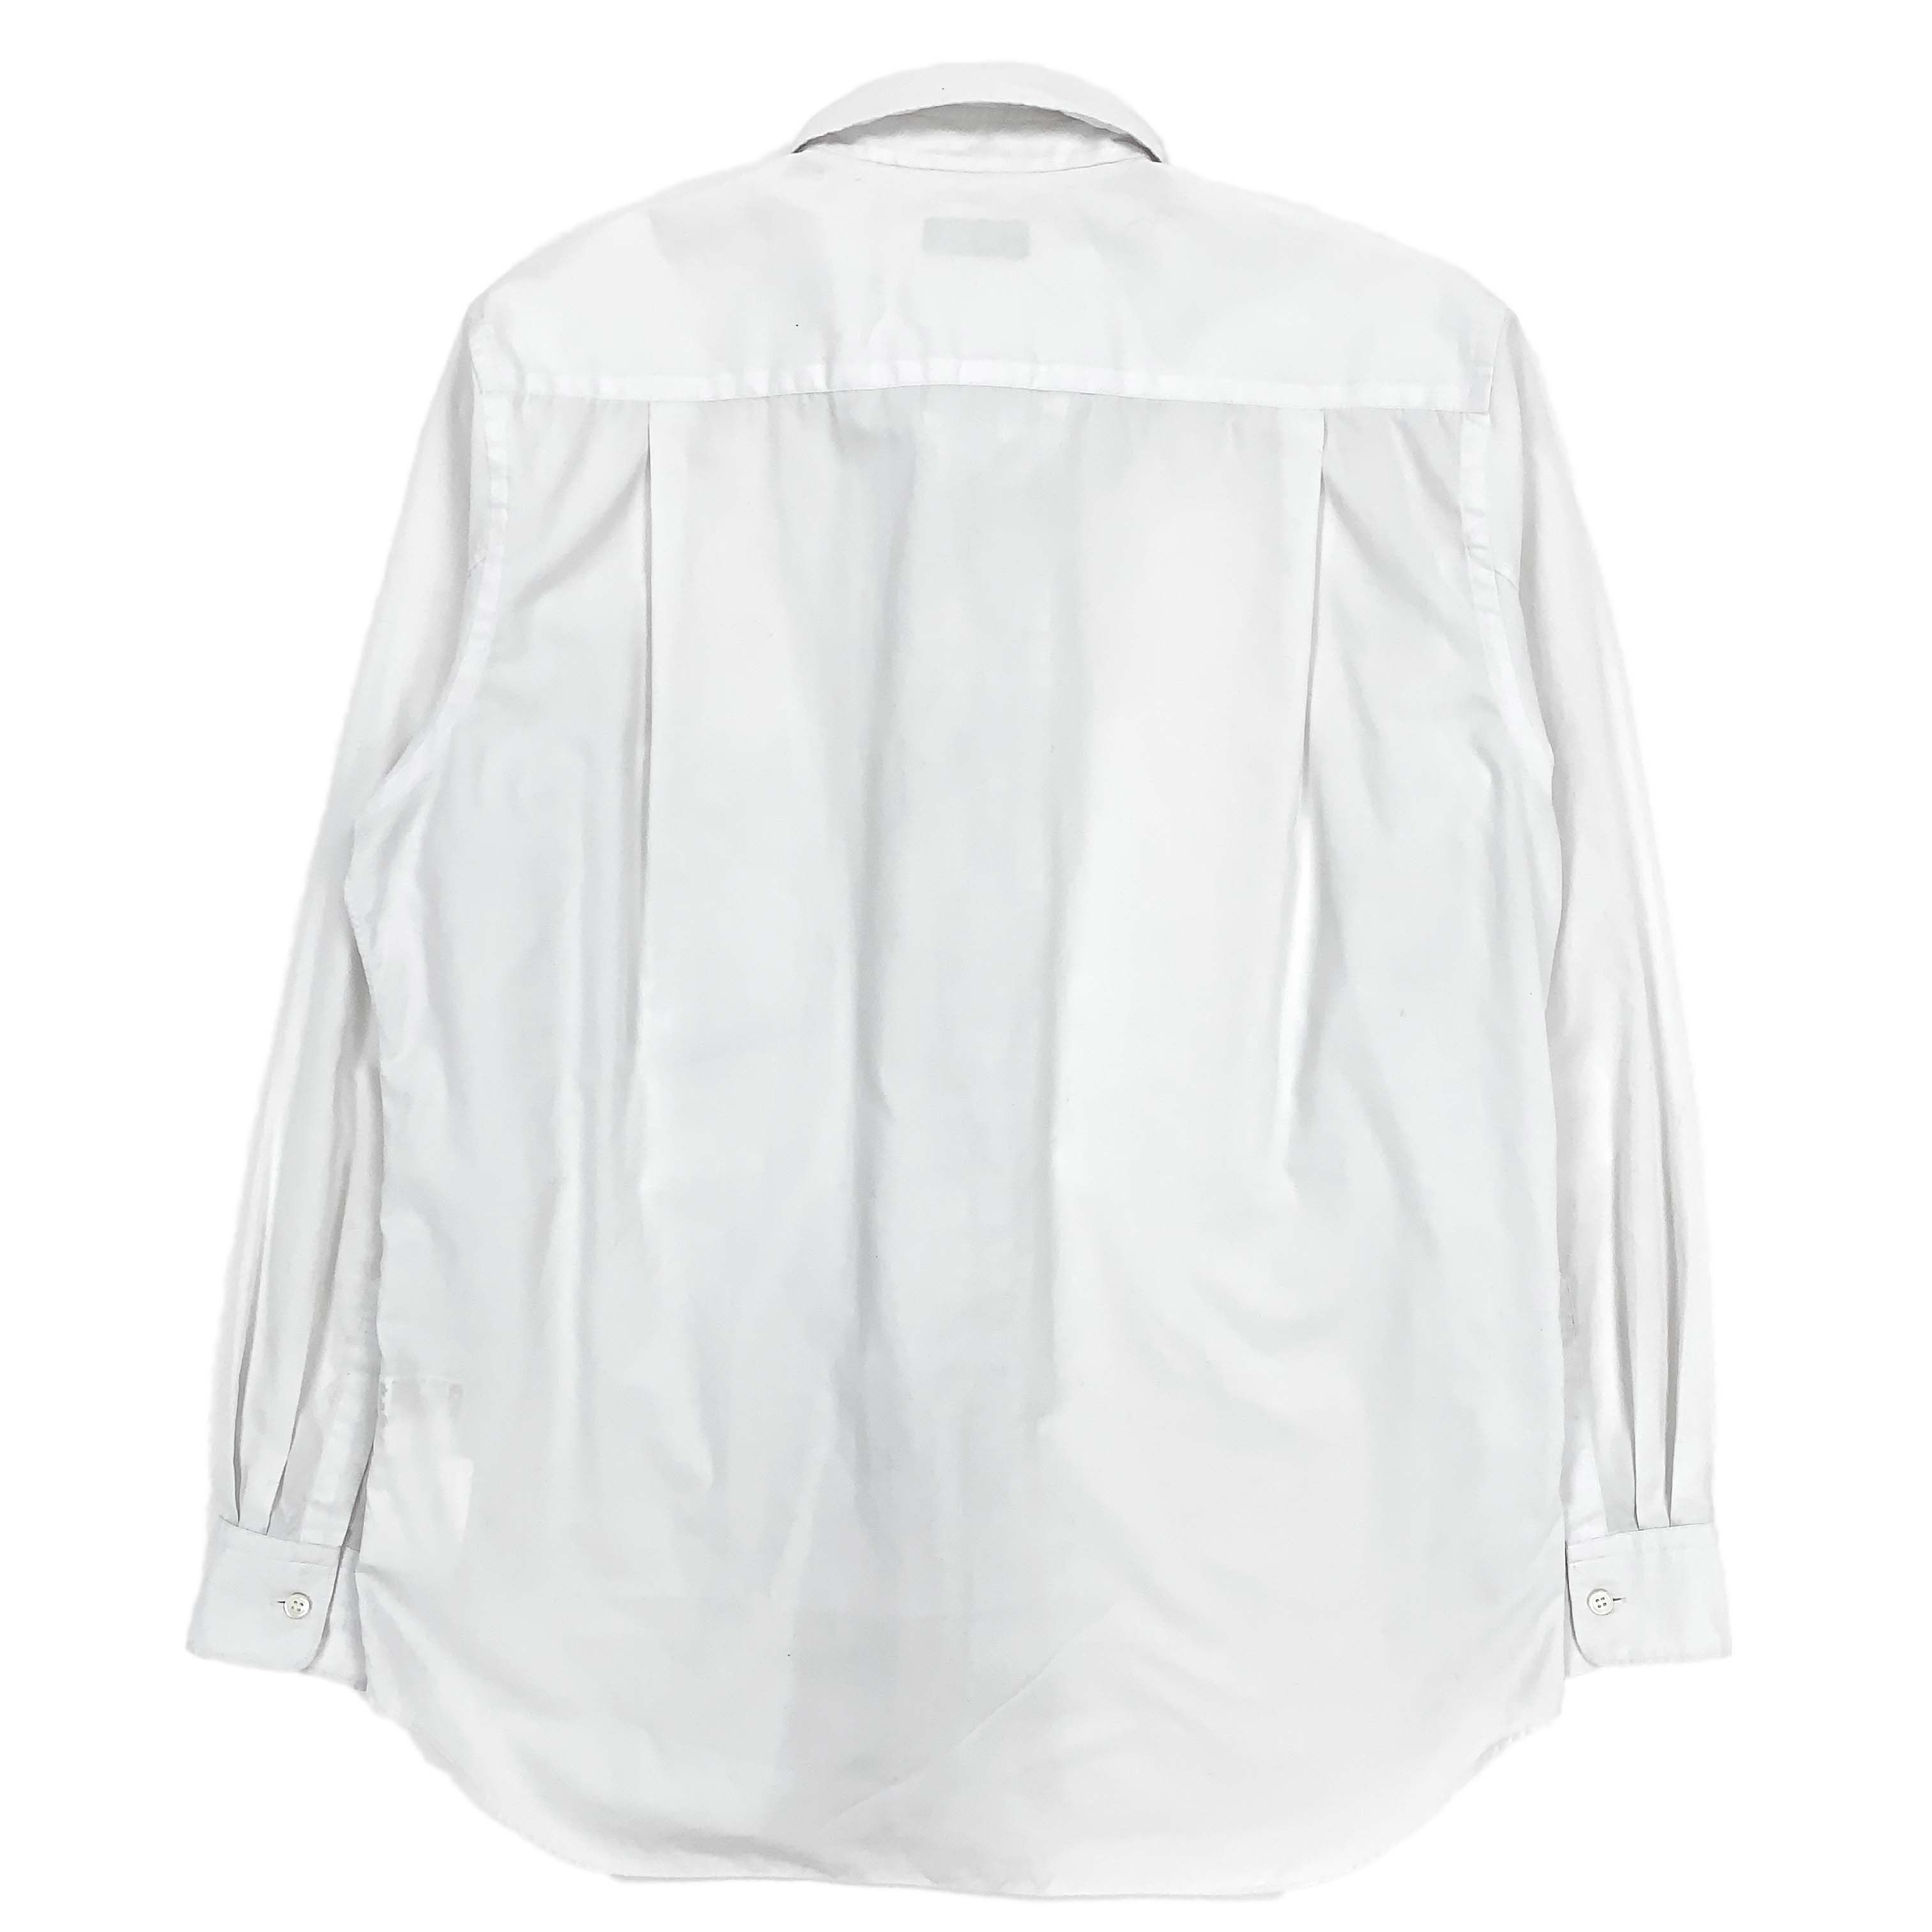 SS99 Concealed Polyester-Cotton Ruffle Shirt - 4